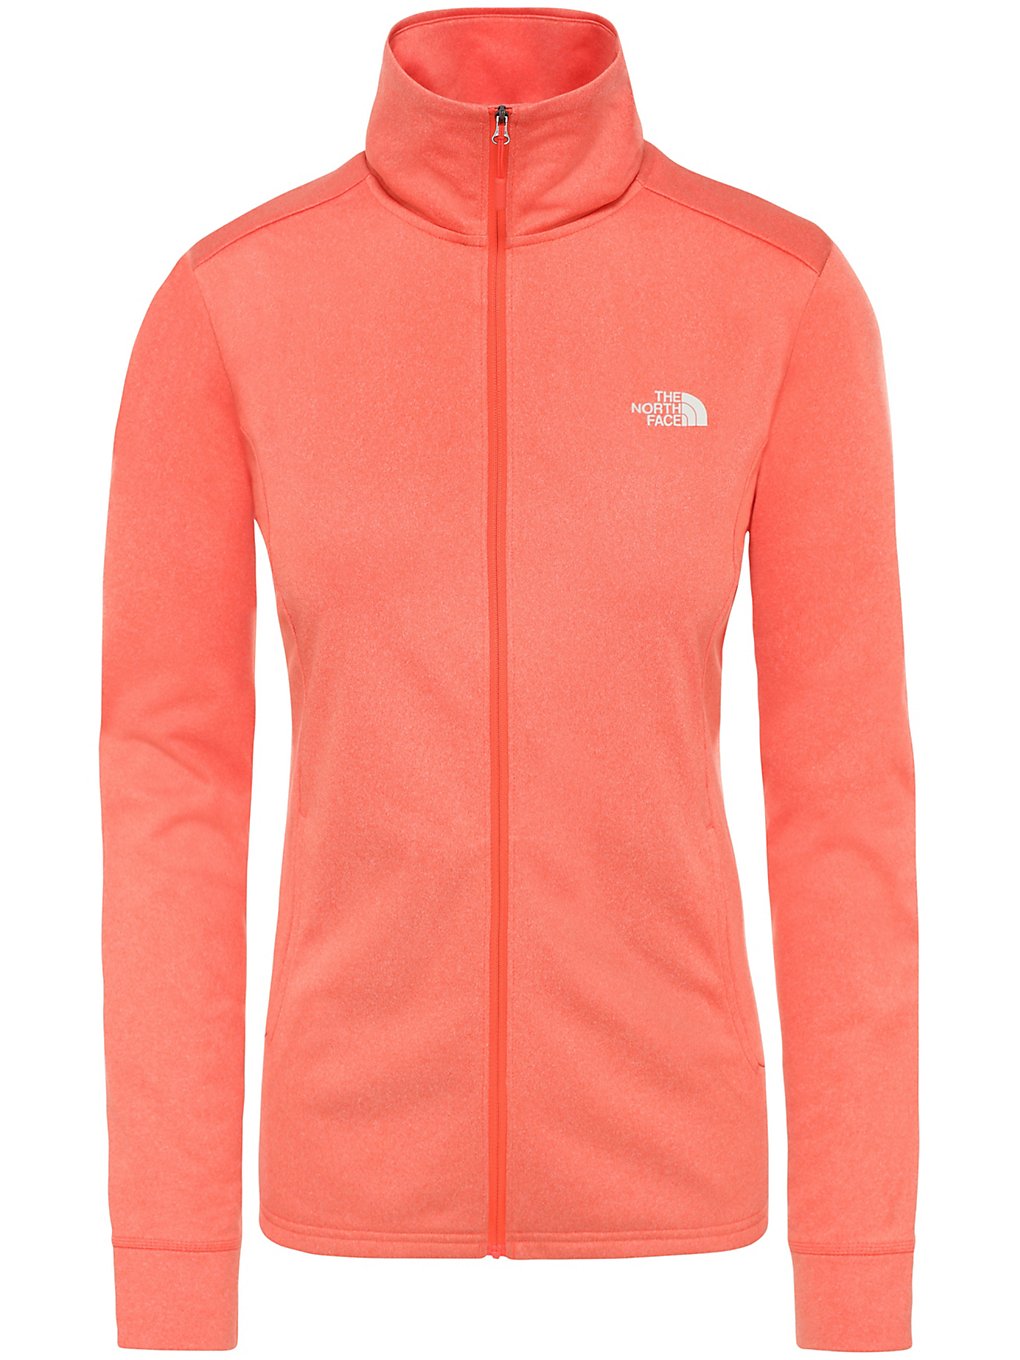 The north face quest full zip midlayer fleece jacket oranssi, the north face